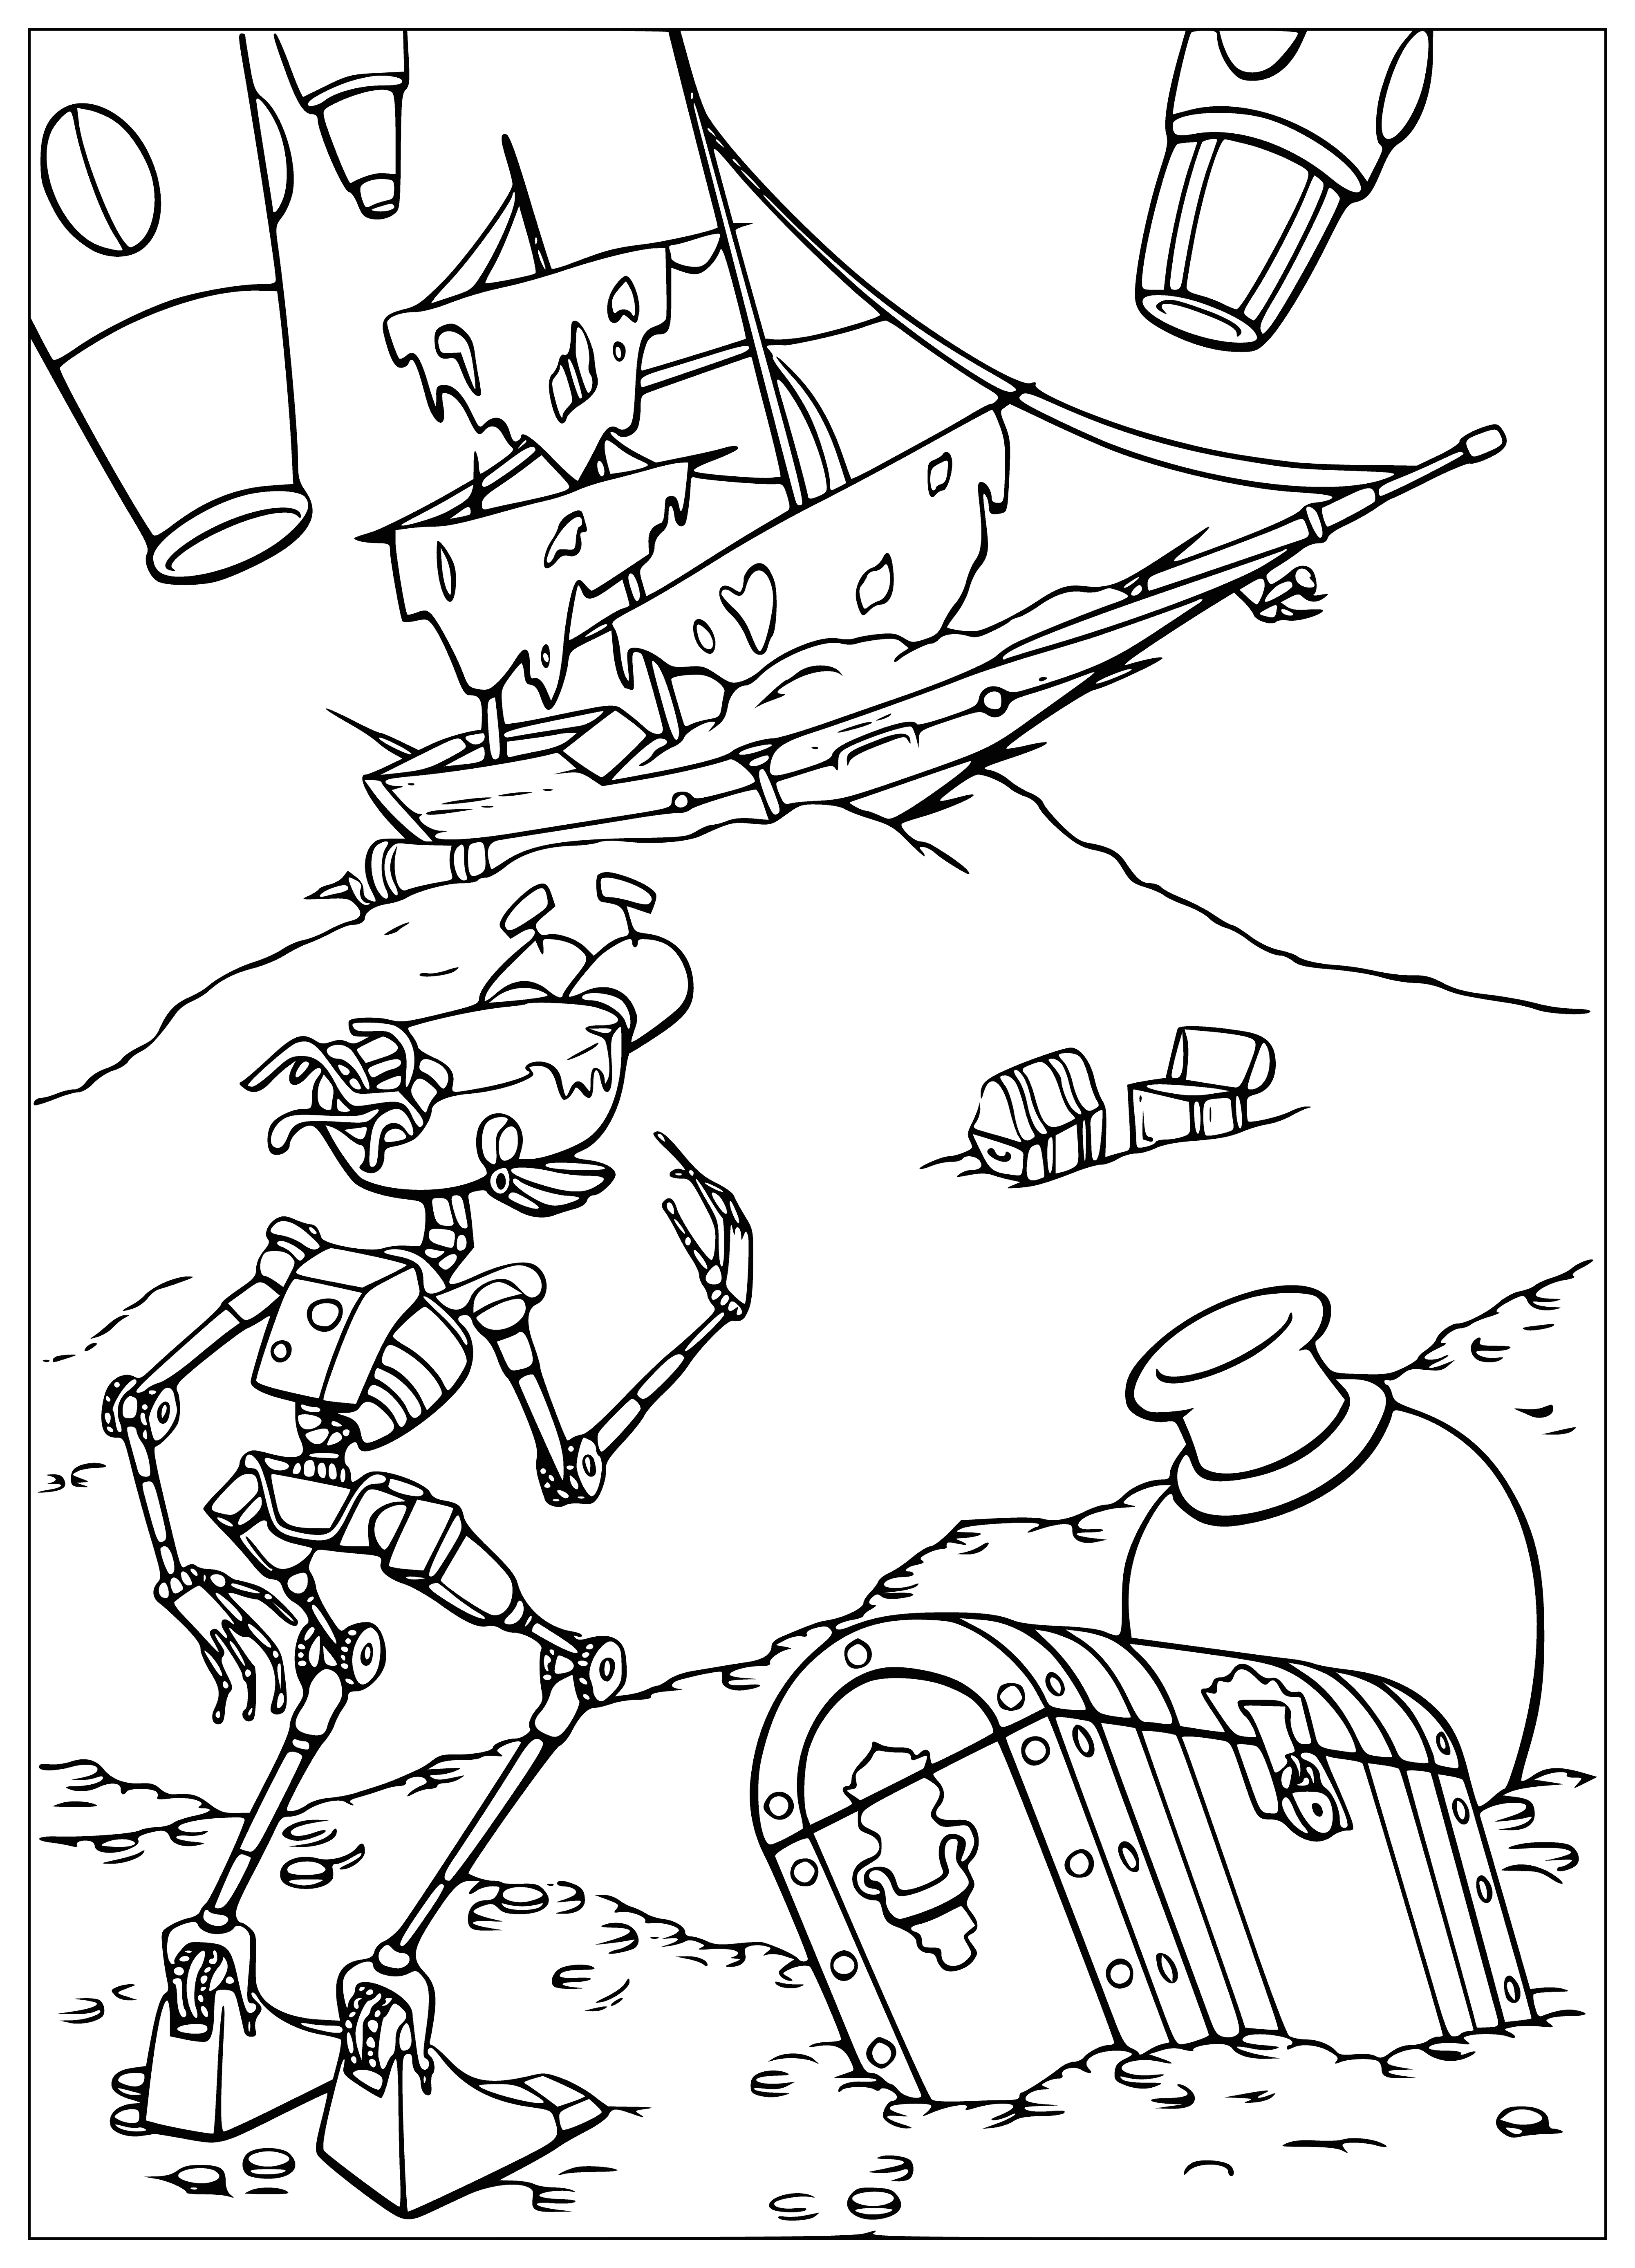 Flint's ship coloring page